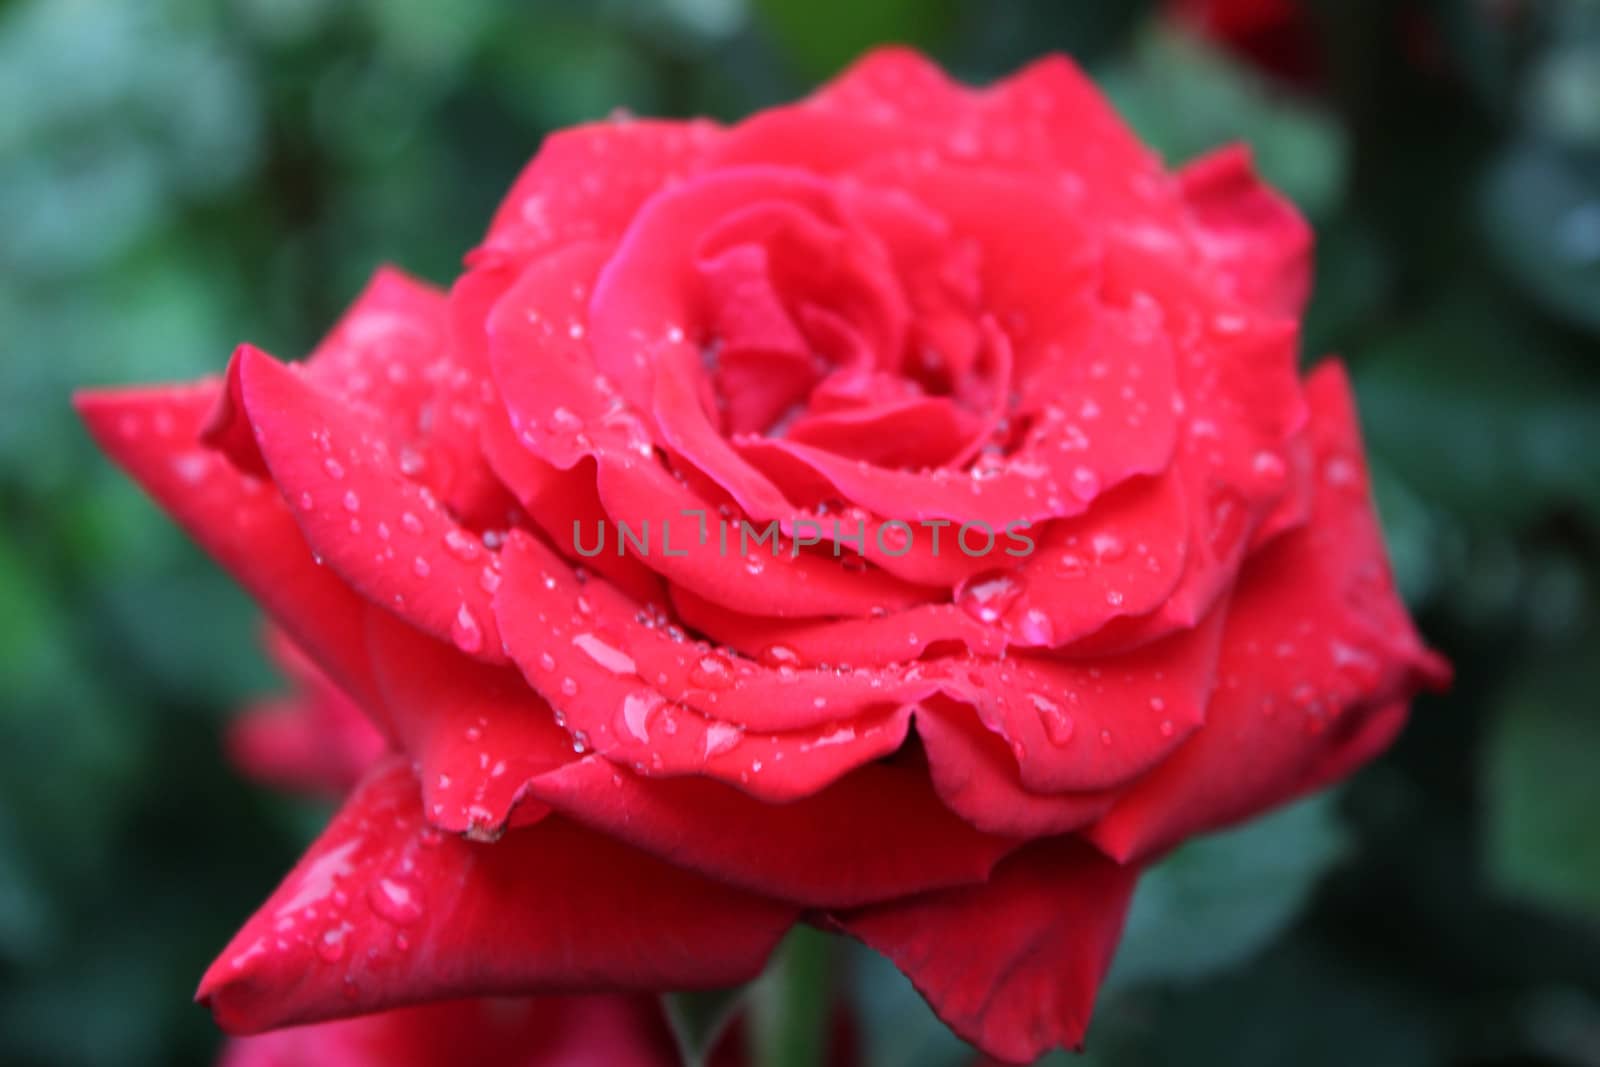 Close-up image of a red rose with dew drops.